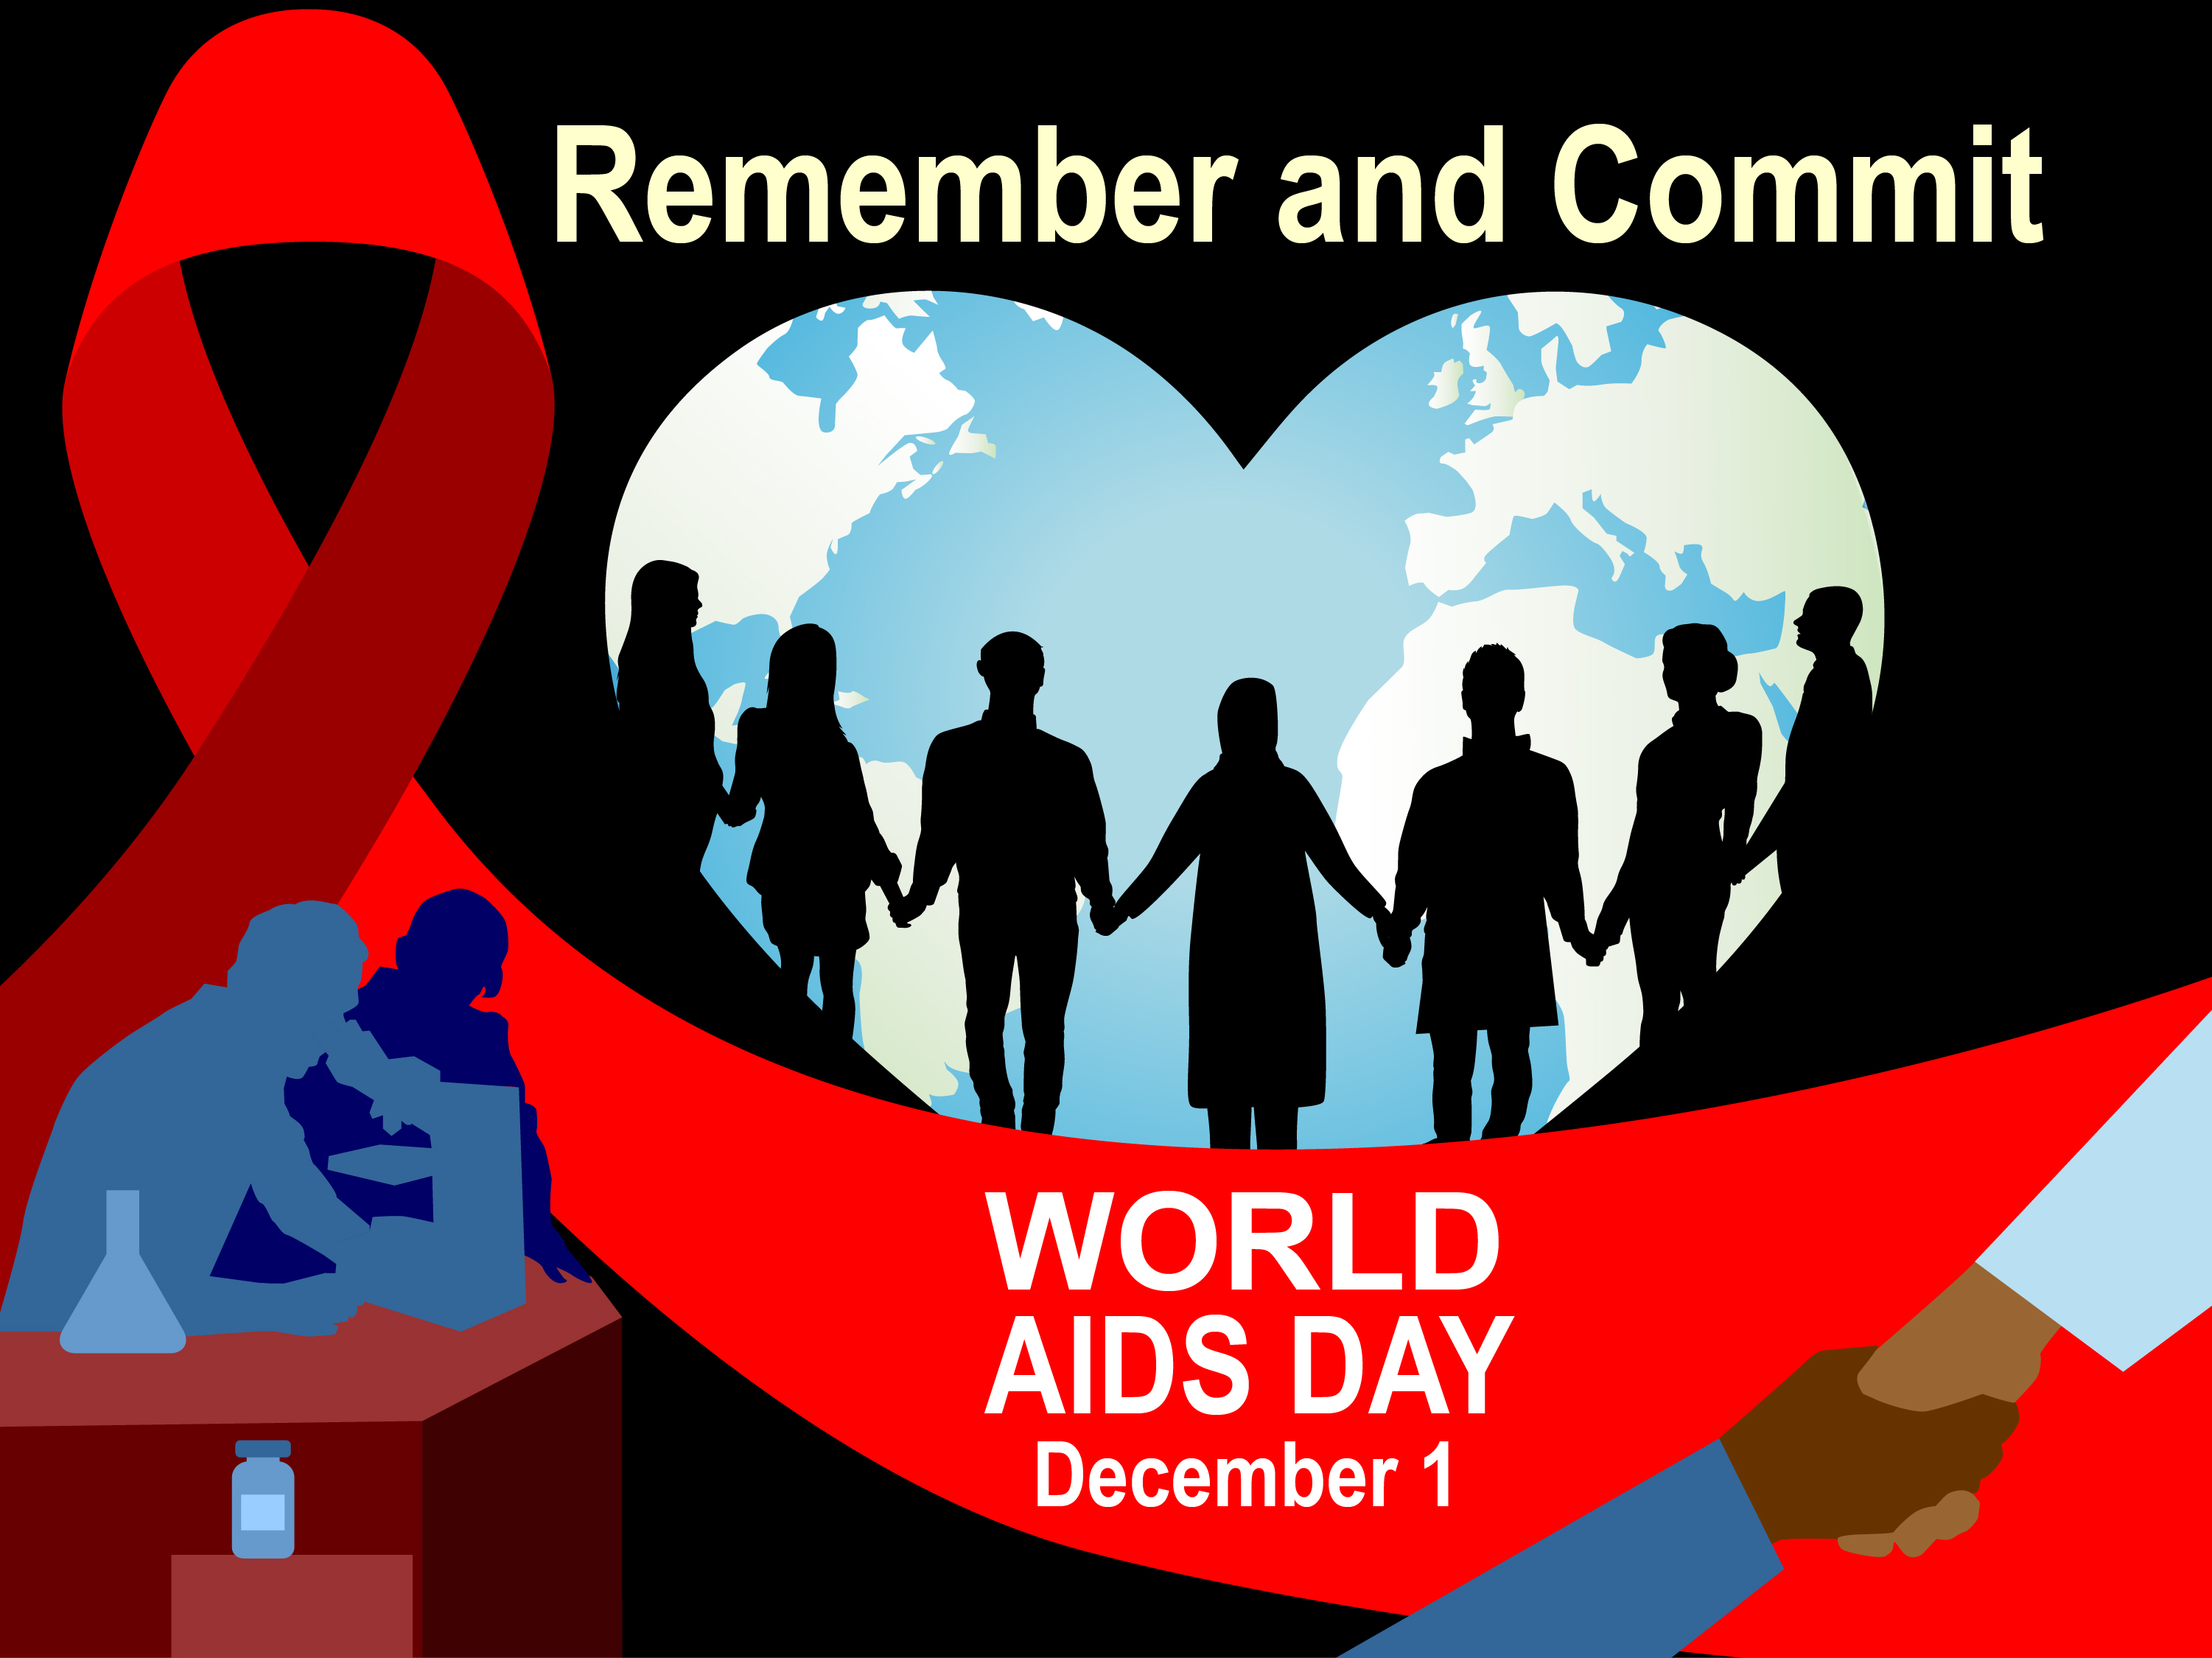 Remember and Commit. World AIDS Day, December 1